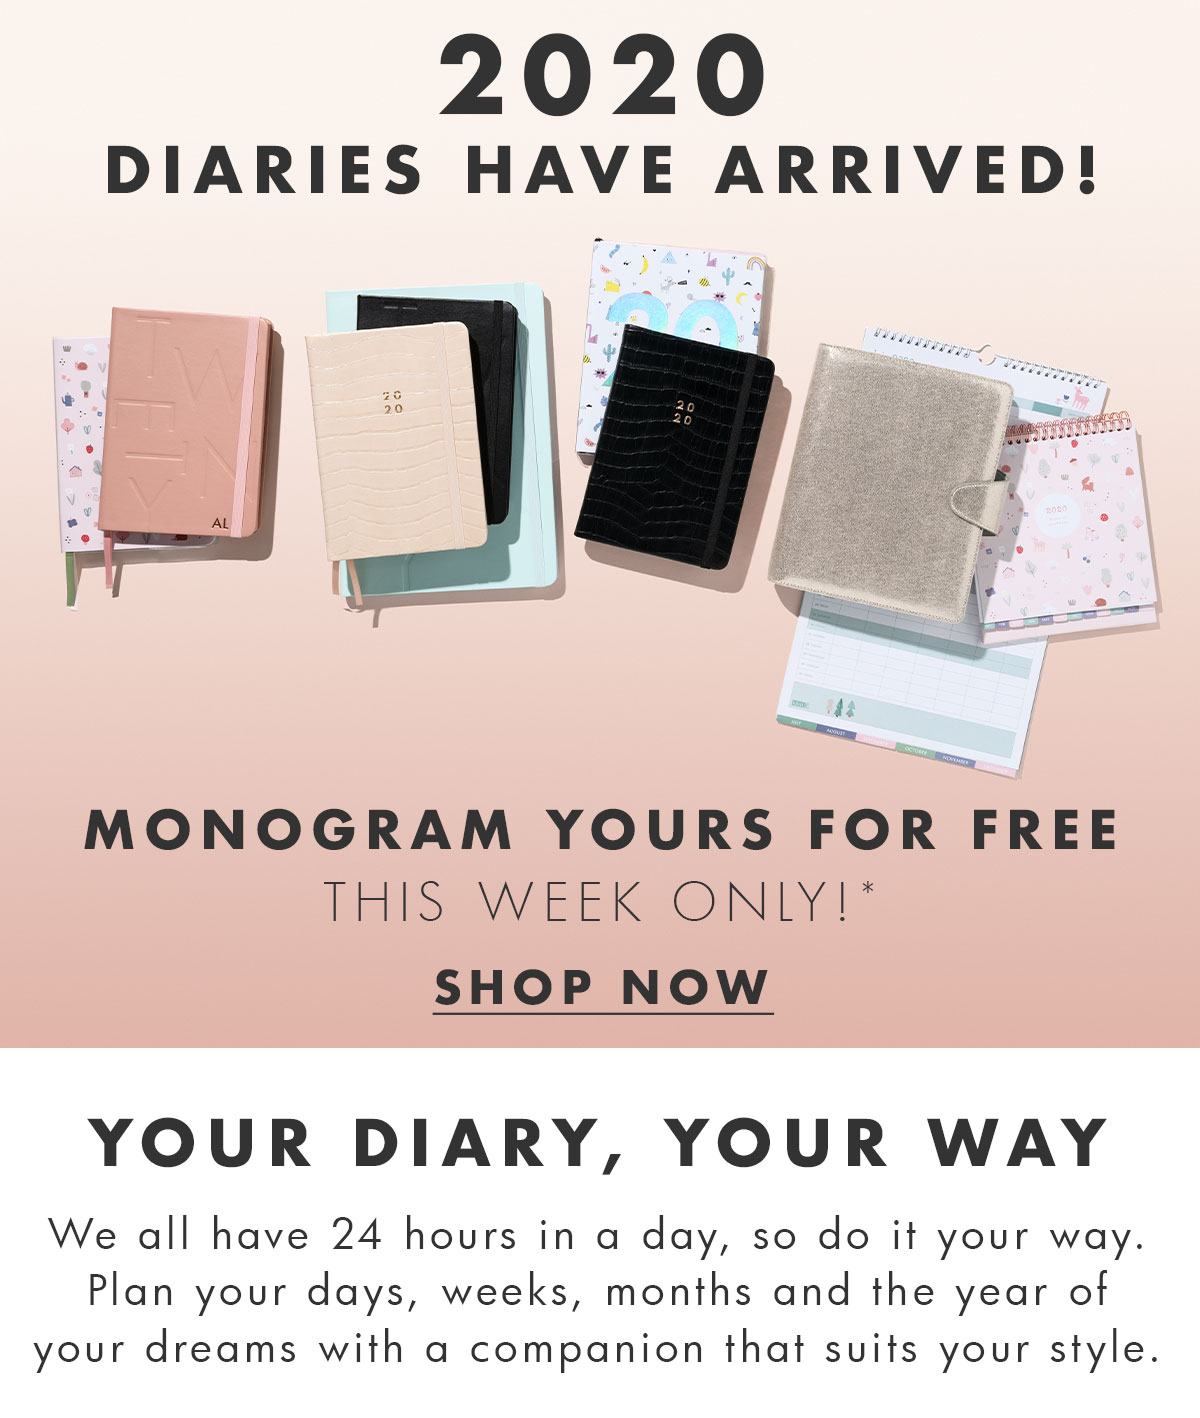 2020 Diaries Have Arrived! Monogram yours for free! One week only!* Shop now. 